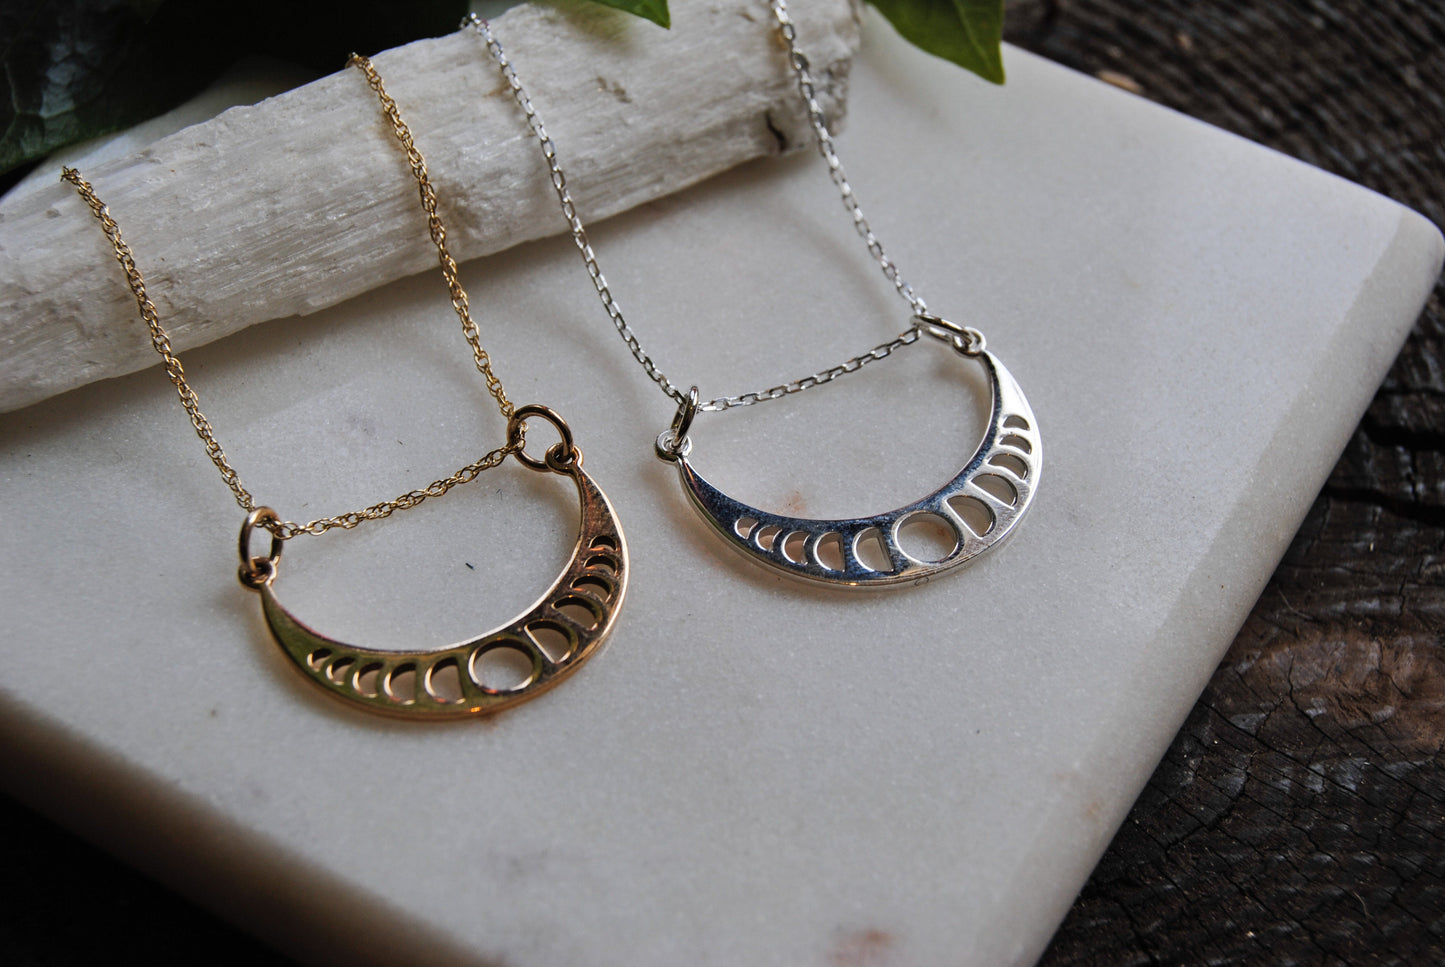 Moon phases crescent necklace